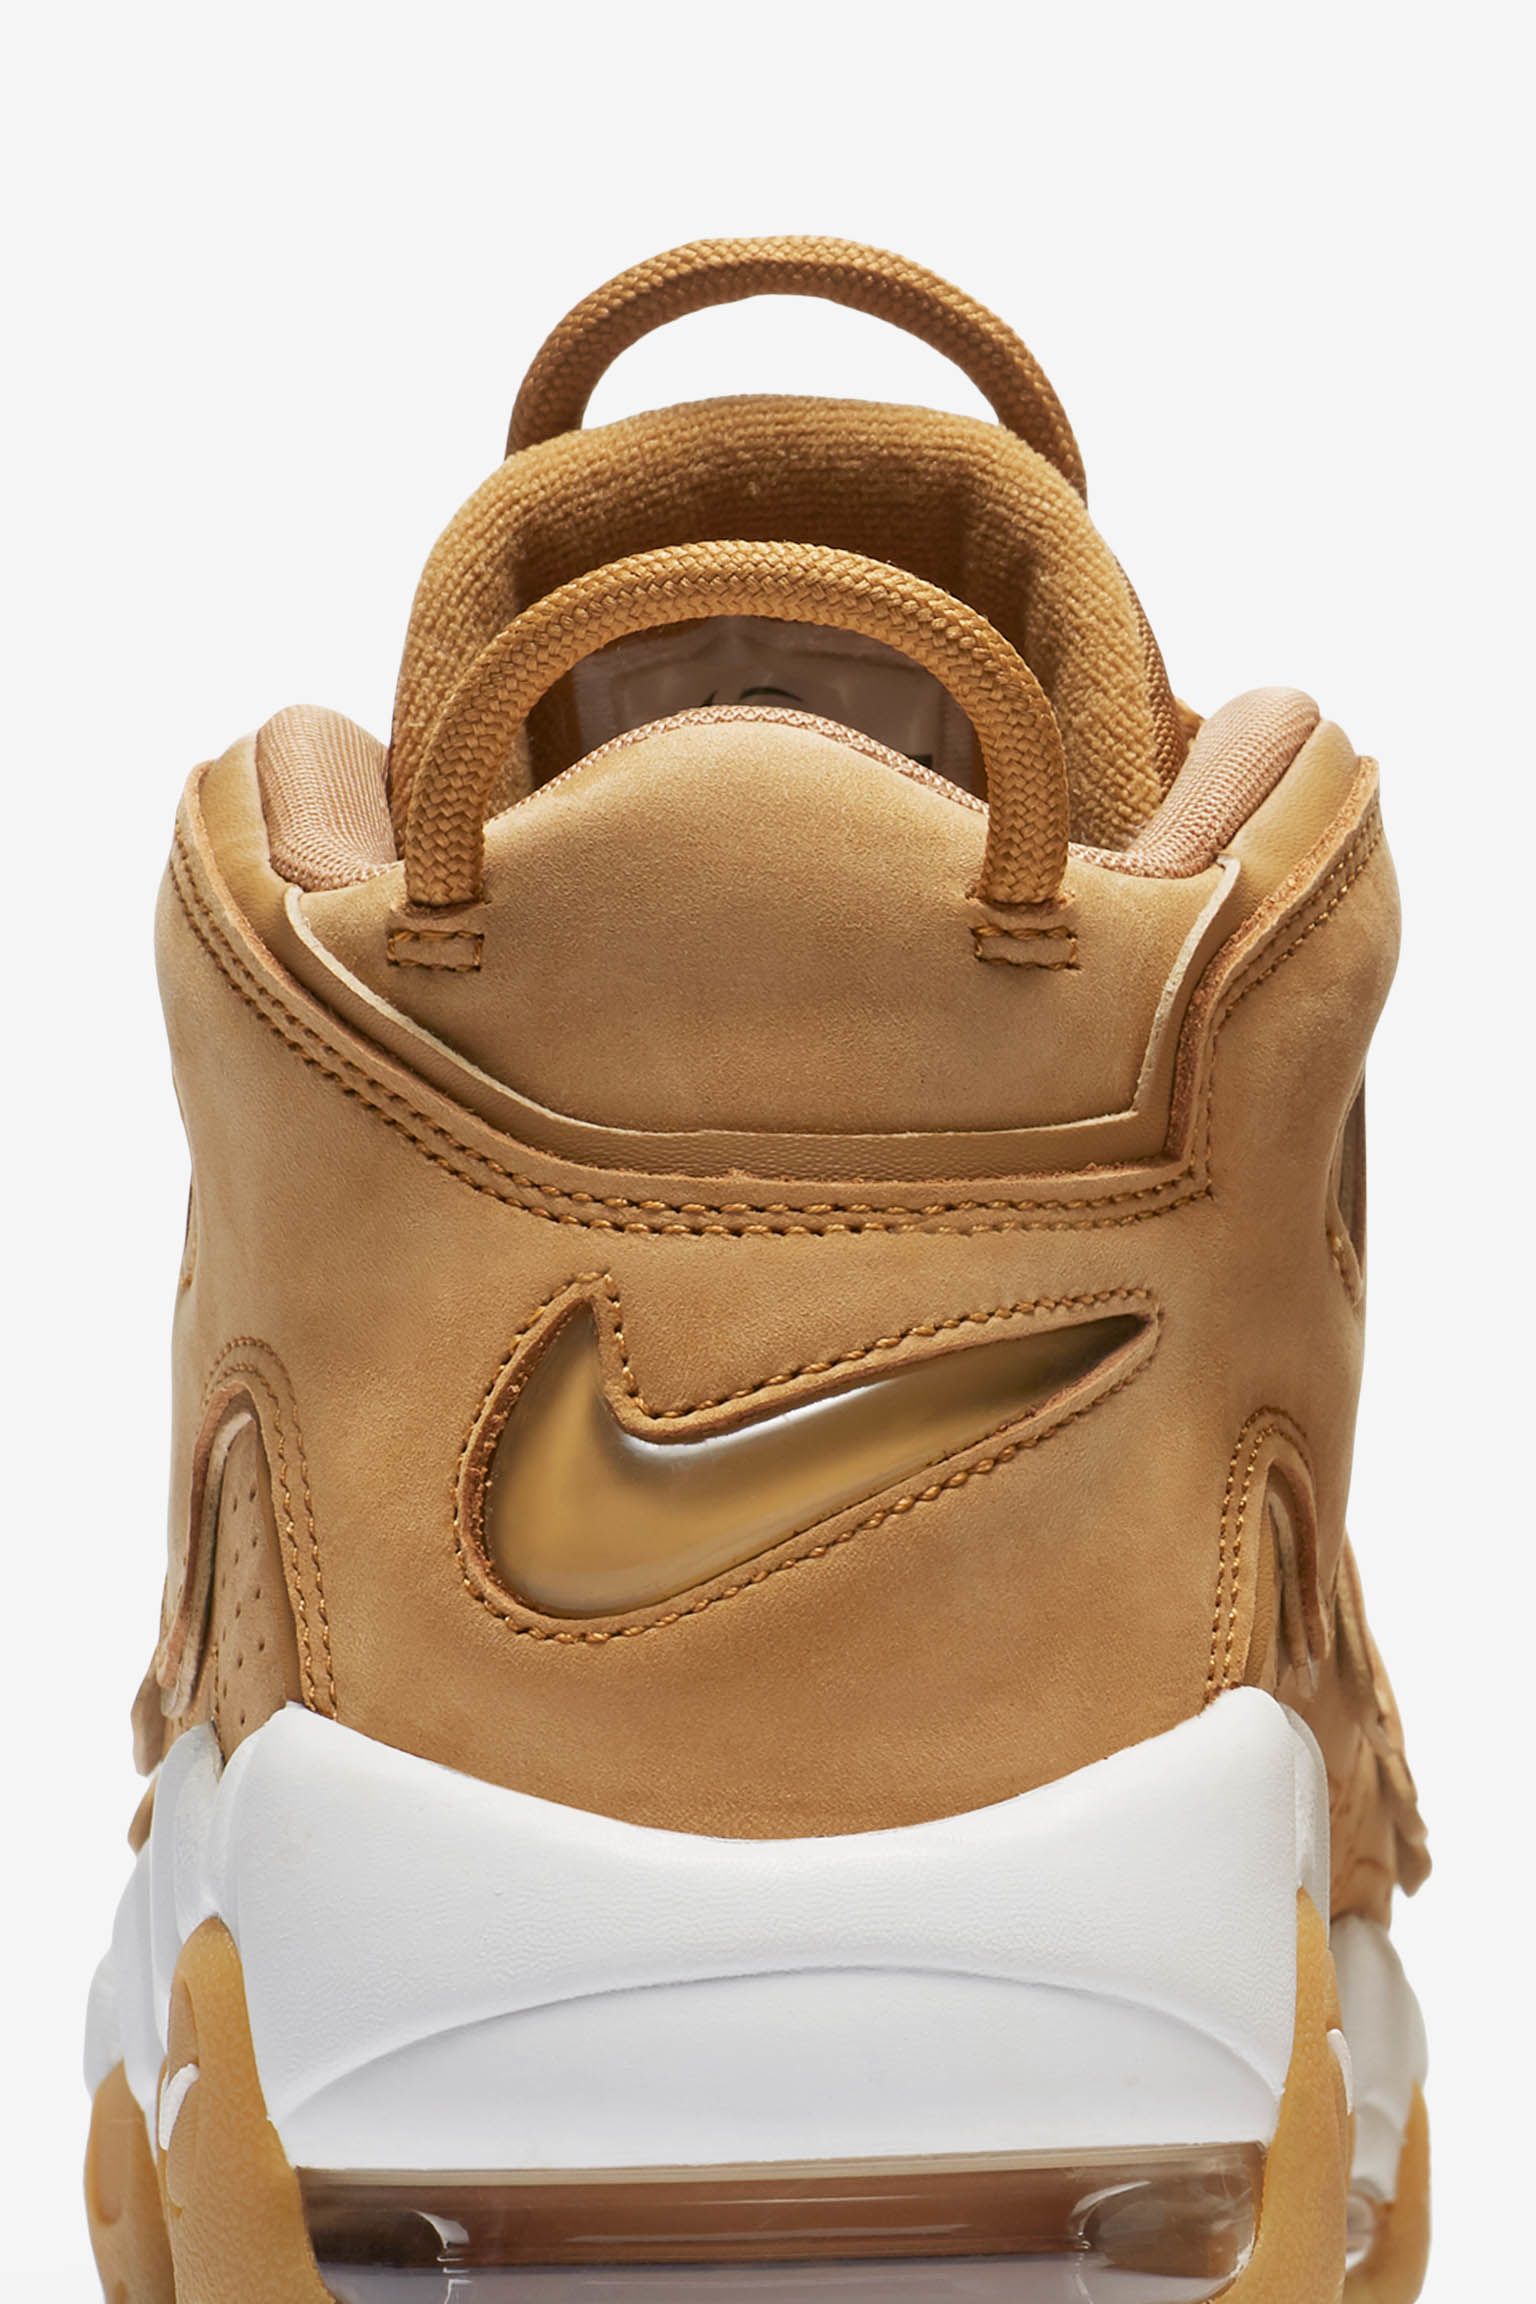 Nike Air More Uptempo 'Flax' Release Date.. Nike SNKRS